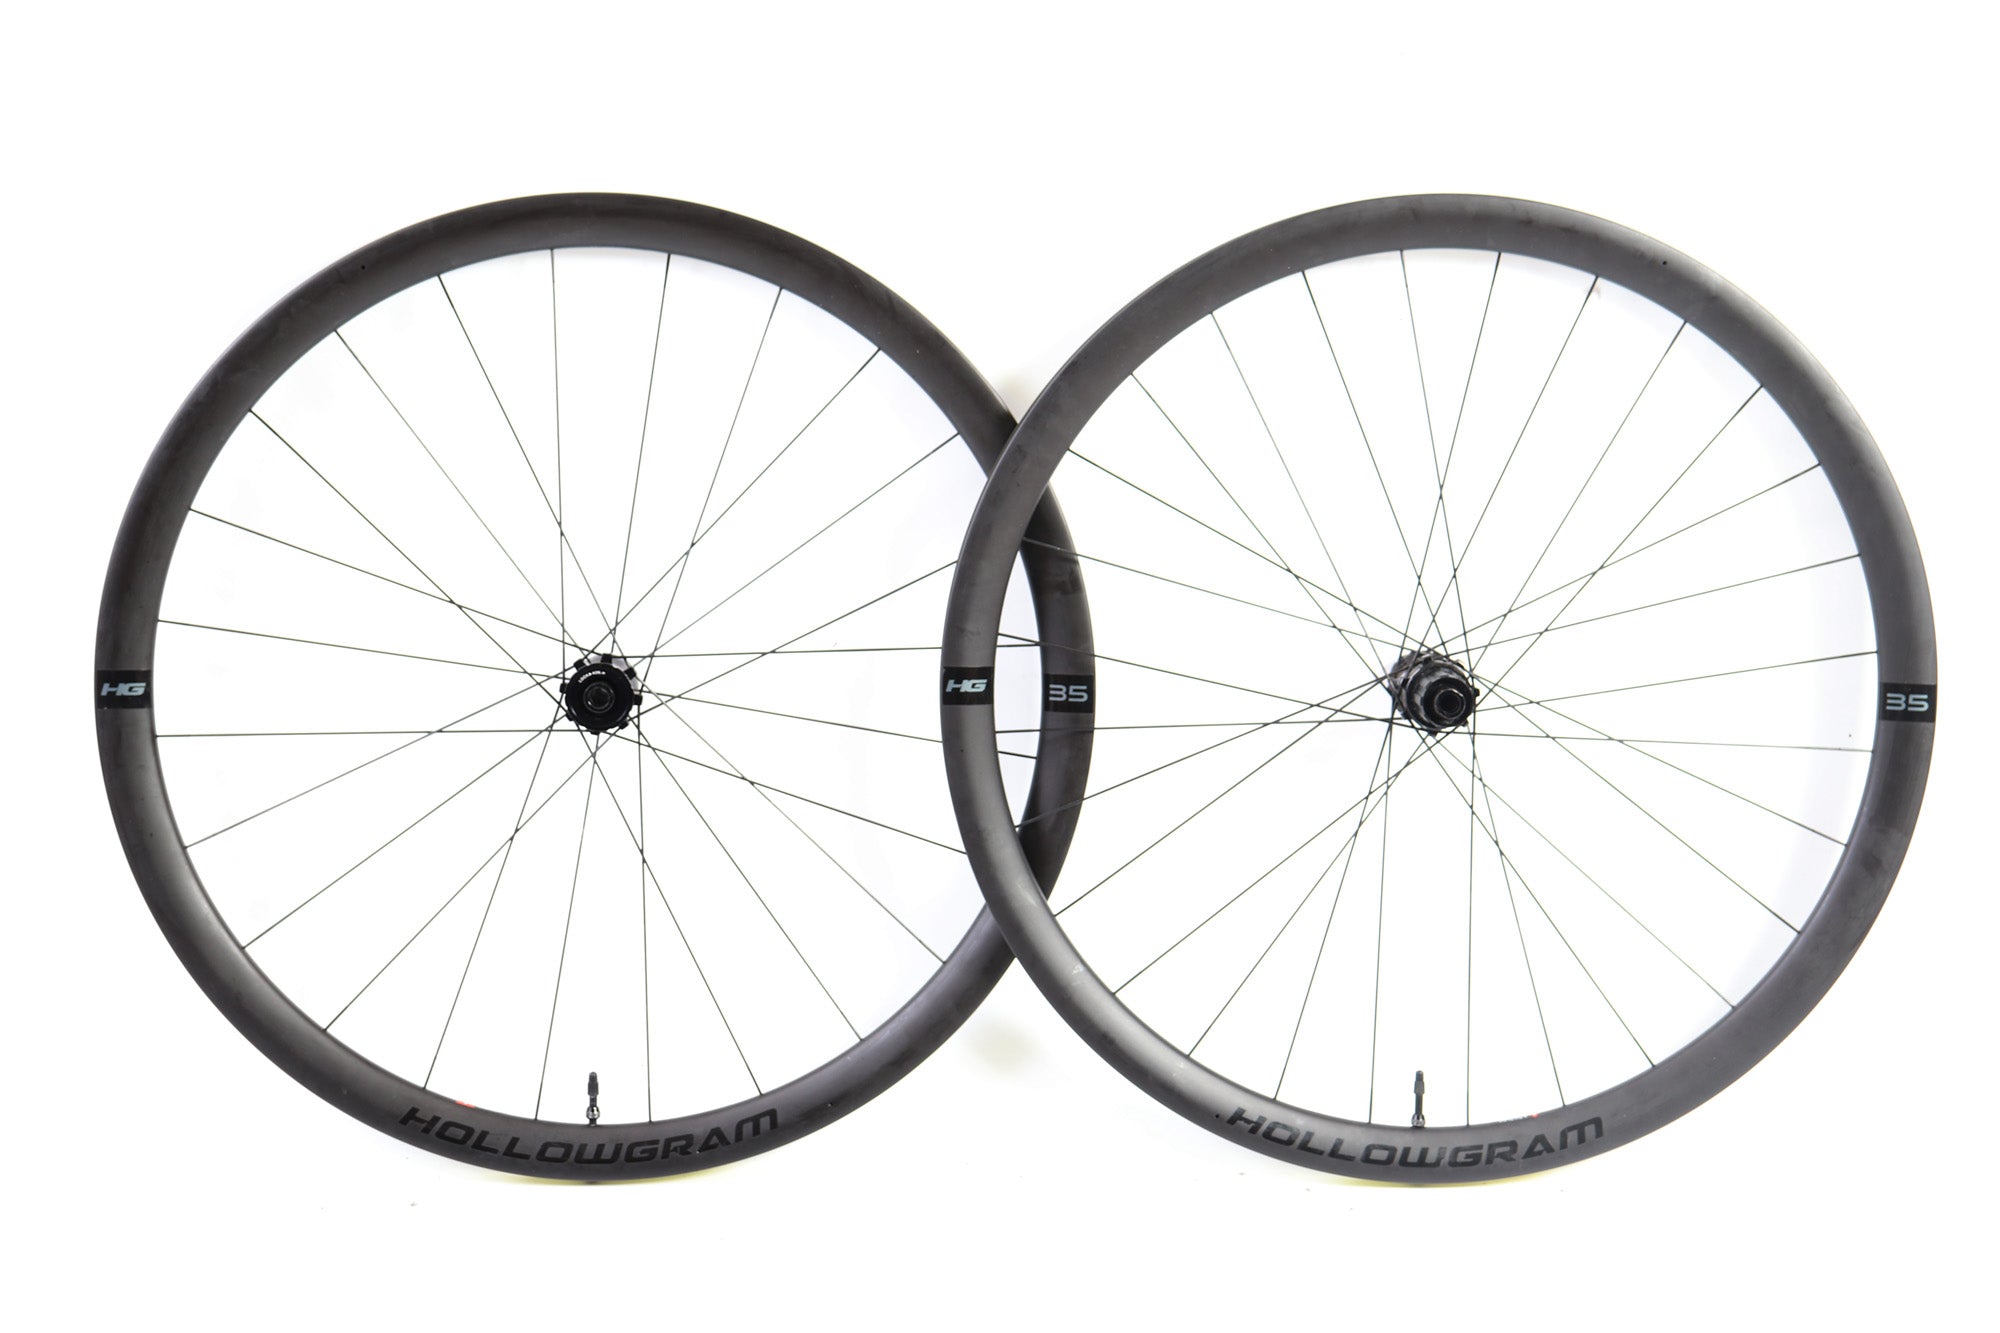 Hollowgram 35 Carbon Clincher Road Wheelset 2021, Shim Cycle